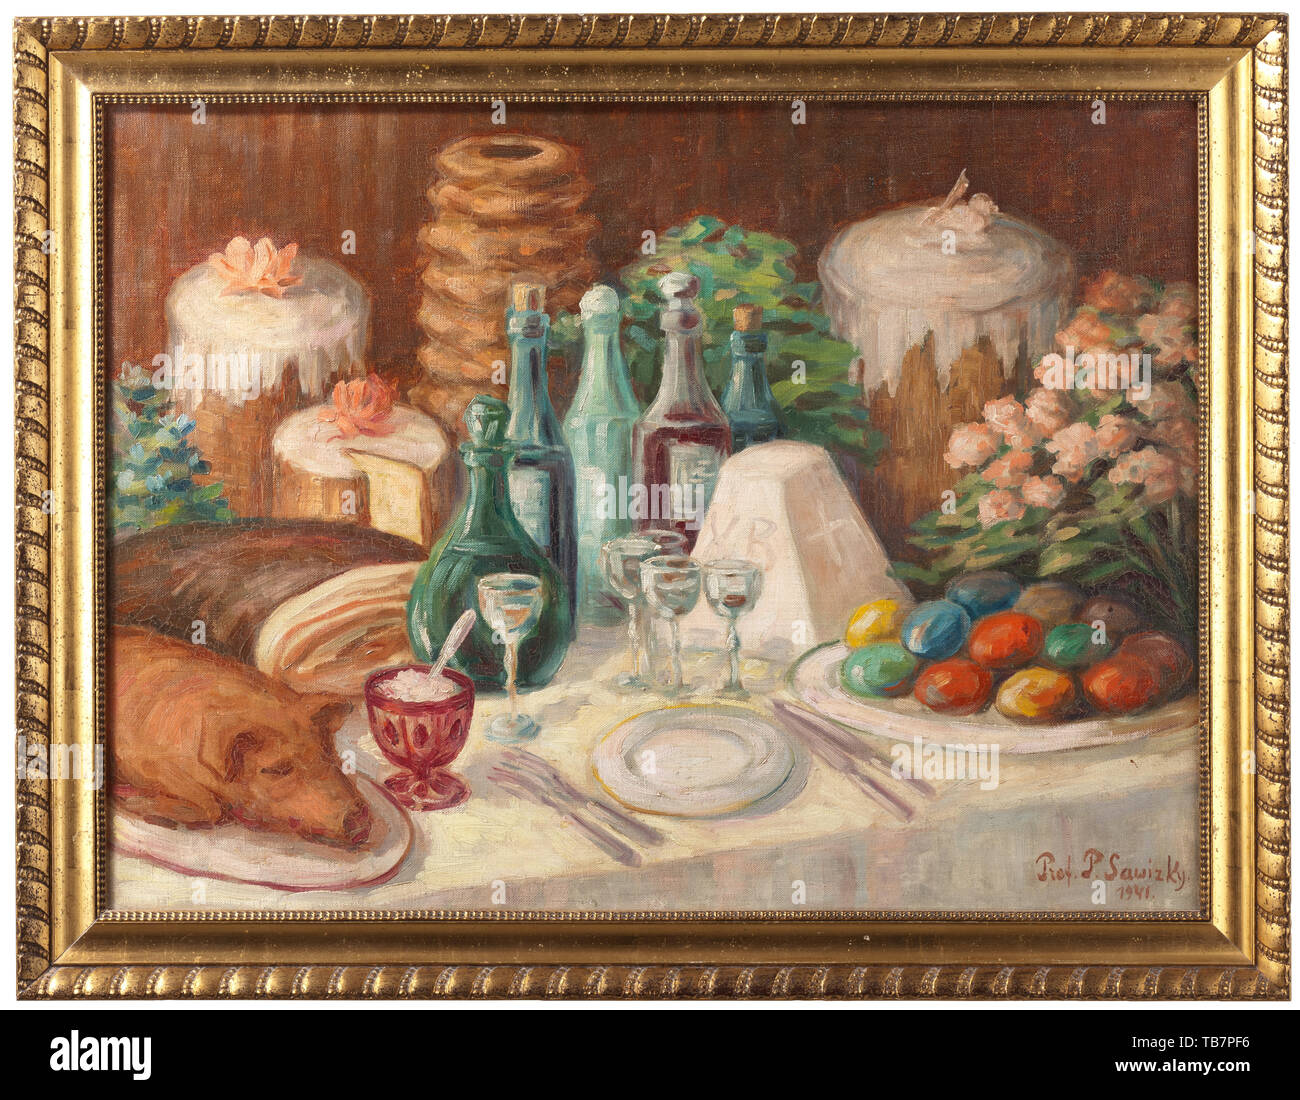 Protoiereus Pavel Olimpievitsh Savitsky (1881 - 1956) - an Easter still life, Oil on canvas, signed at the bottom right and dated 'Prot. P. Sawizky 1941'. The table sumptuously set with Easter cakes, Easter eggs, flowers, drinks and a suckling pig. In a gilt wooden frame. Dimension of painting 60 x 80 cm. Dimension of frame 71 x 91 cm. Protoiereus Pavel Olimpievitsh Savitsky was a Russian painter and sculptor, as well as a famous orthodox church leader during the emigration. He studied under I.P. Trutnev at the Vilensky Art Academy and at the chu, Additional-Rights-Clearance-Info-Not-Available Stock Photo